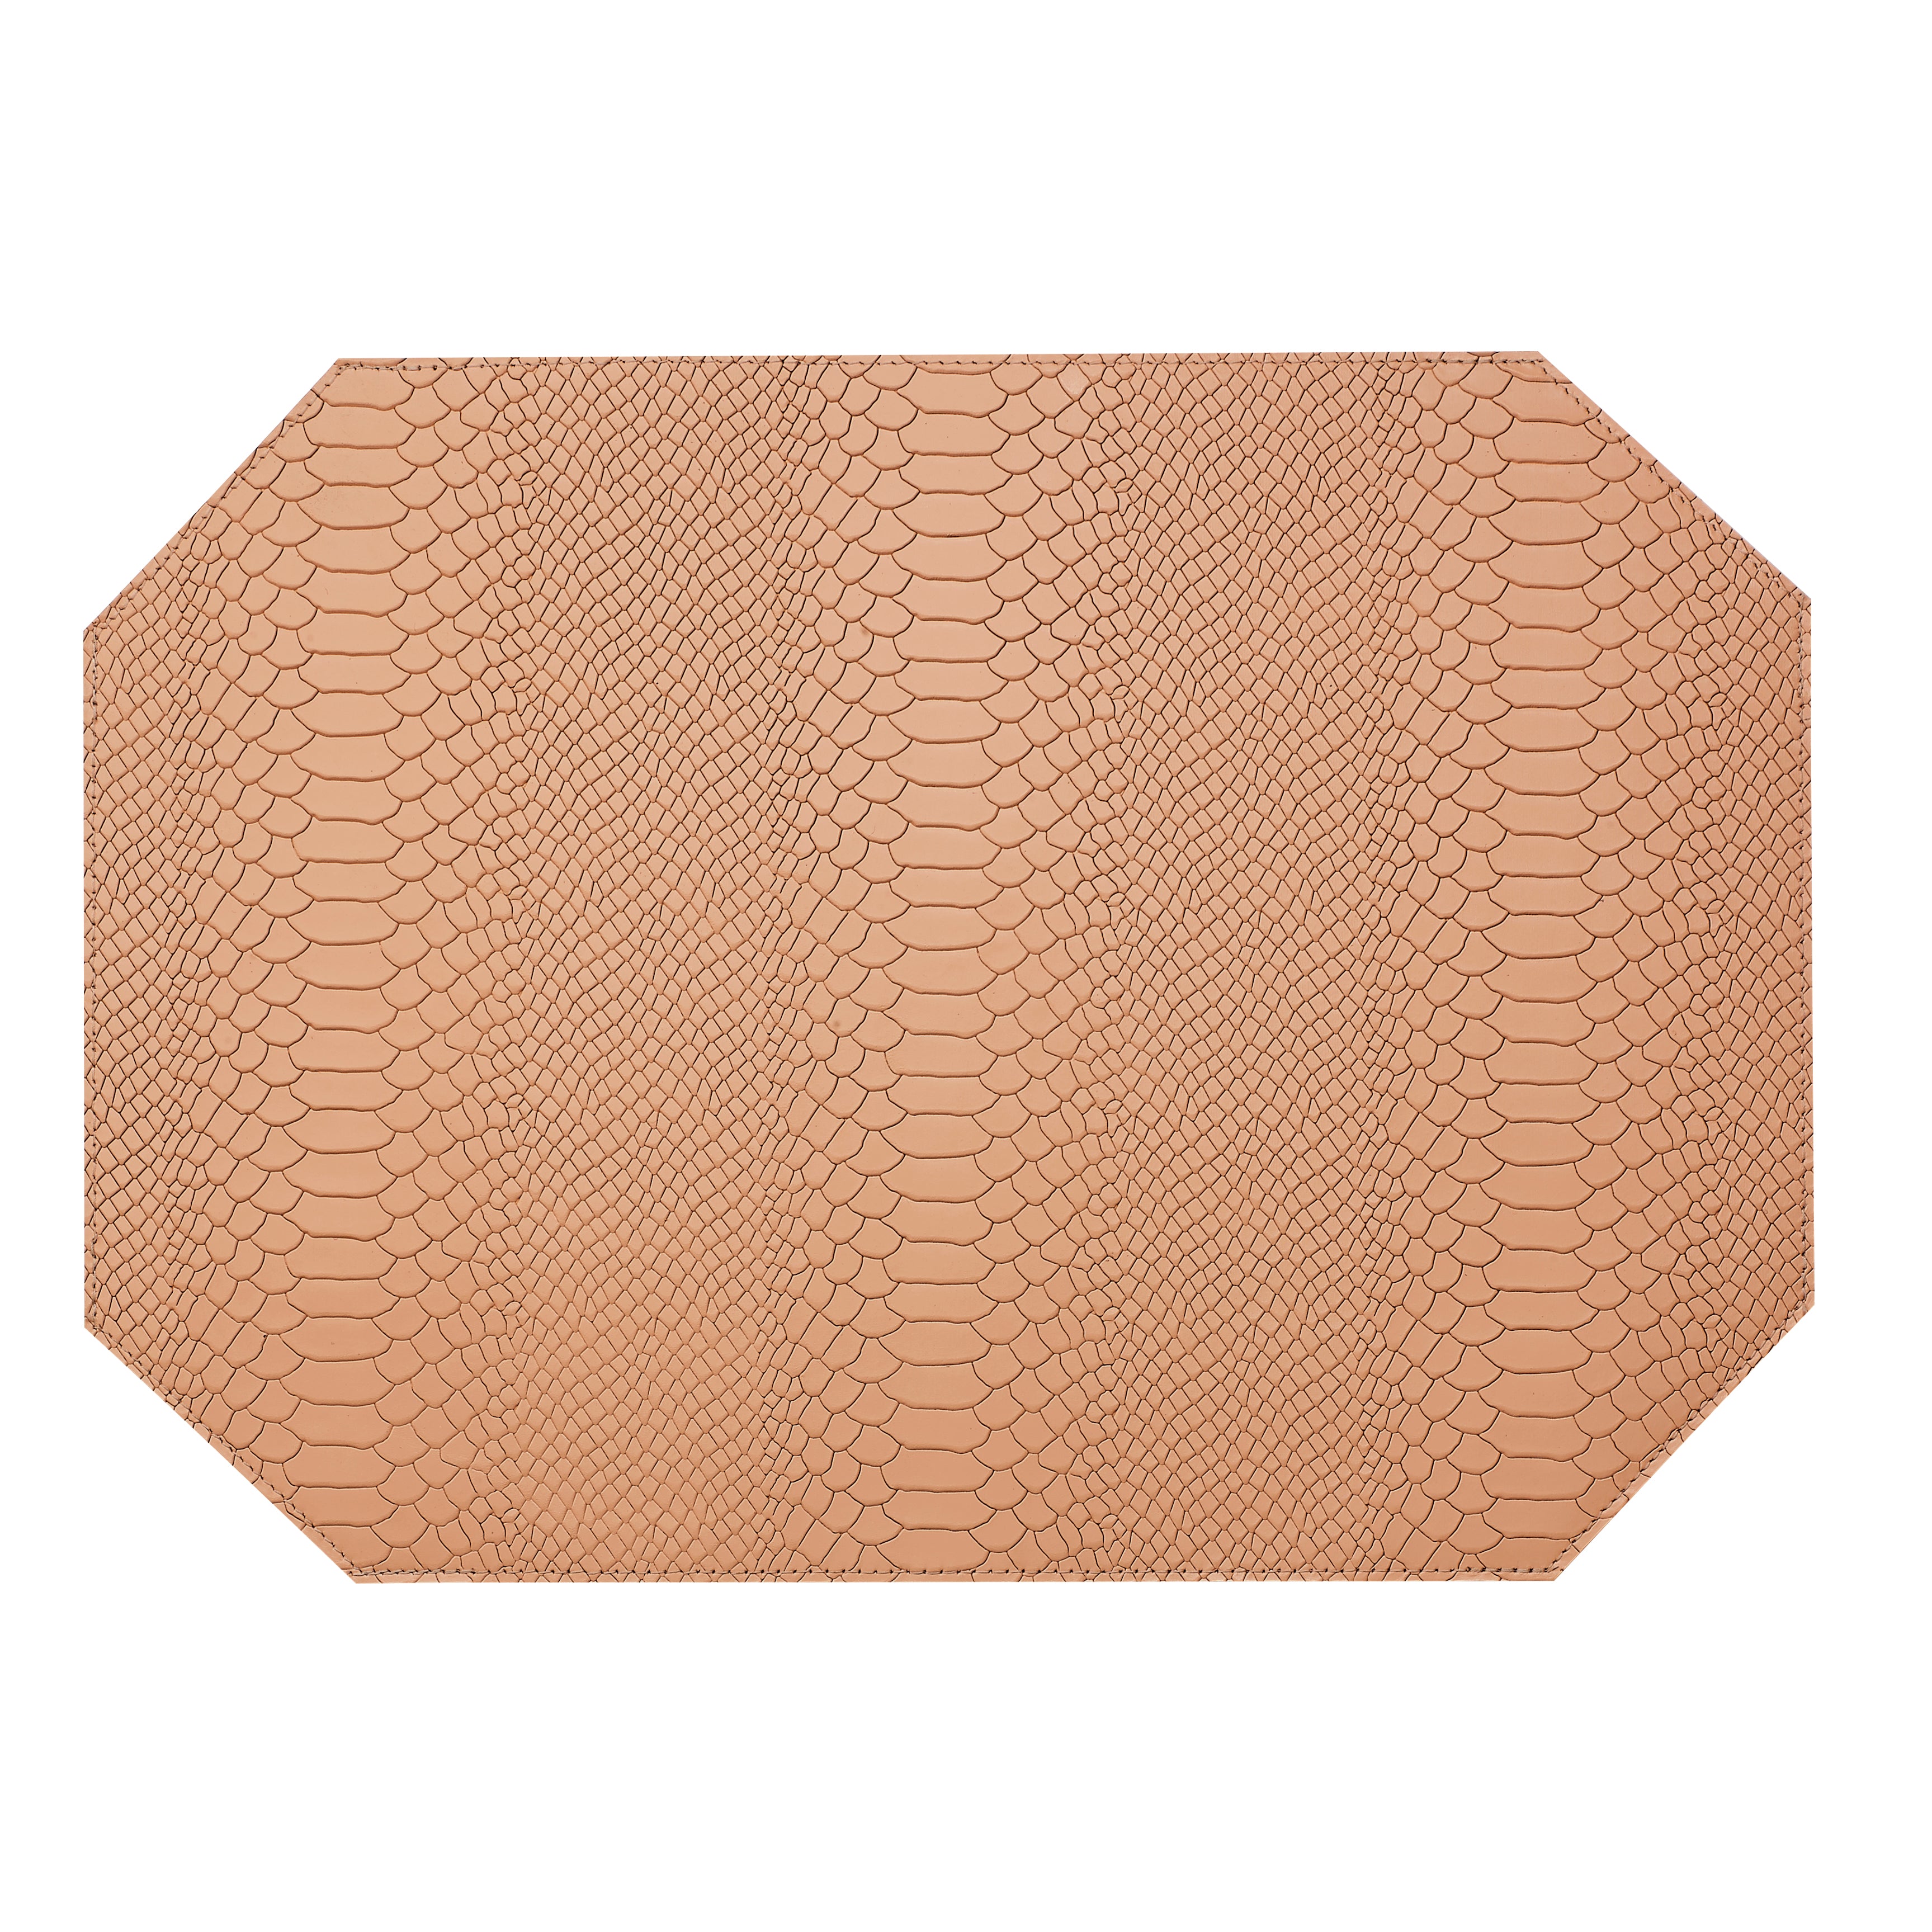 Graphic Image Leather Rectangle Placemats - Set Of 2 British Tan Embossed Python Leather